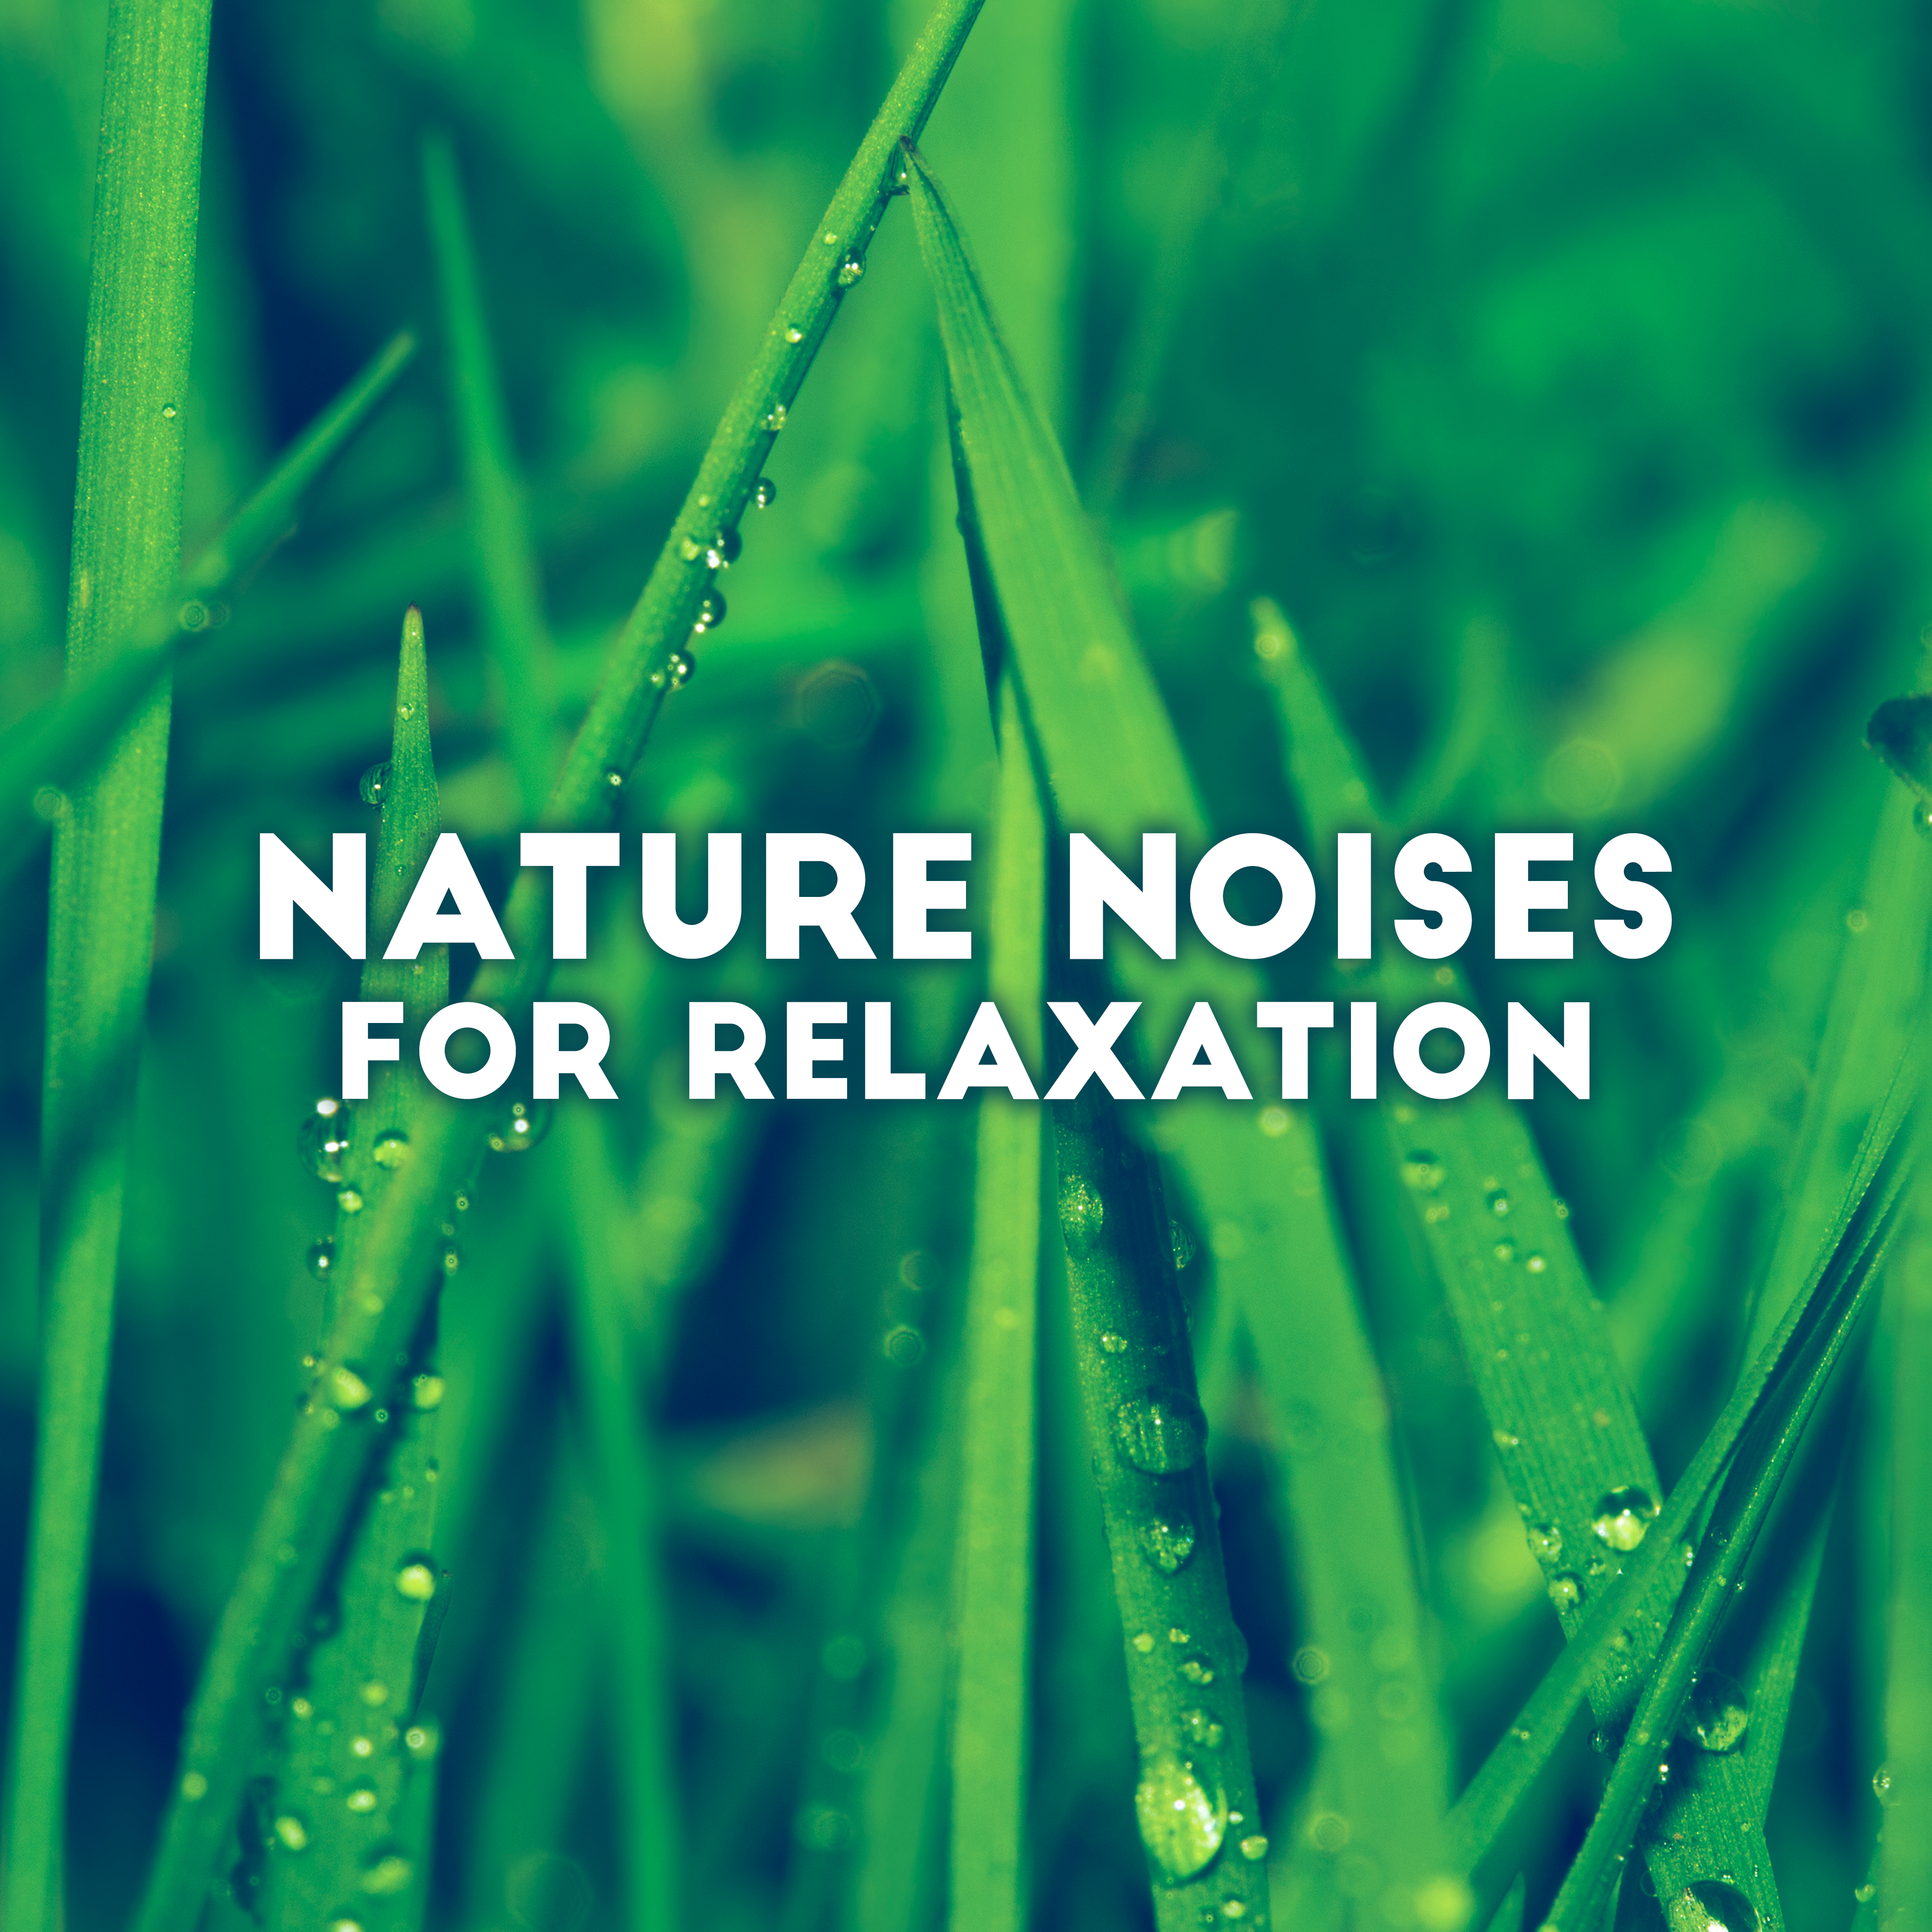 Nature Noises for Relaxation